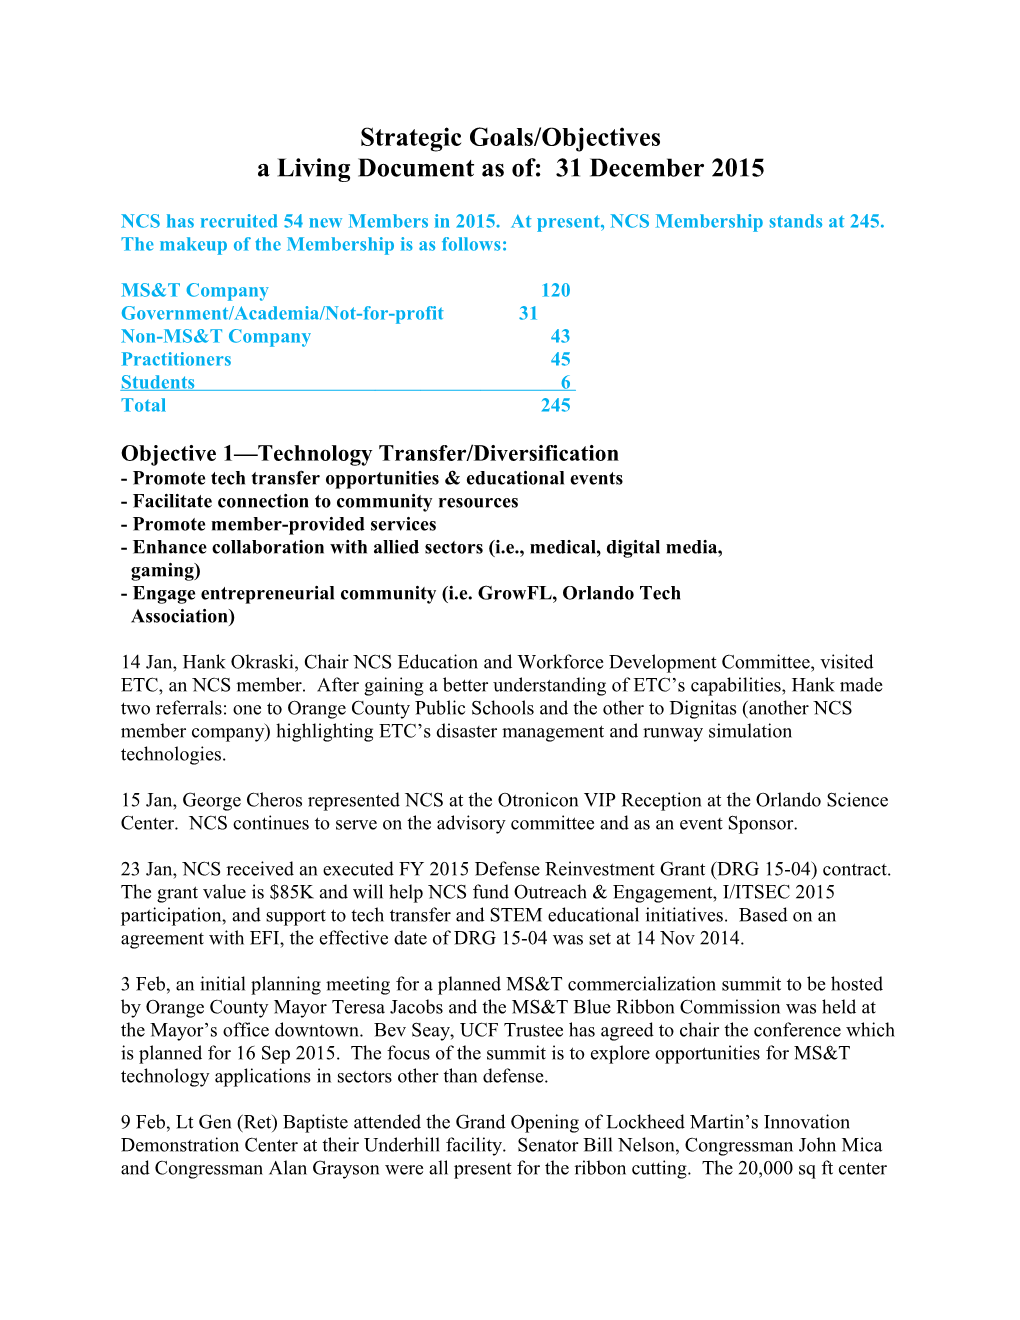 Strategic Goals/Objectives a Living Document As Of: 31 December 2015